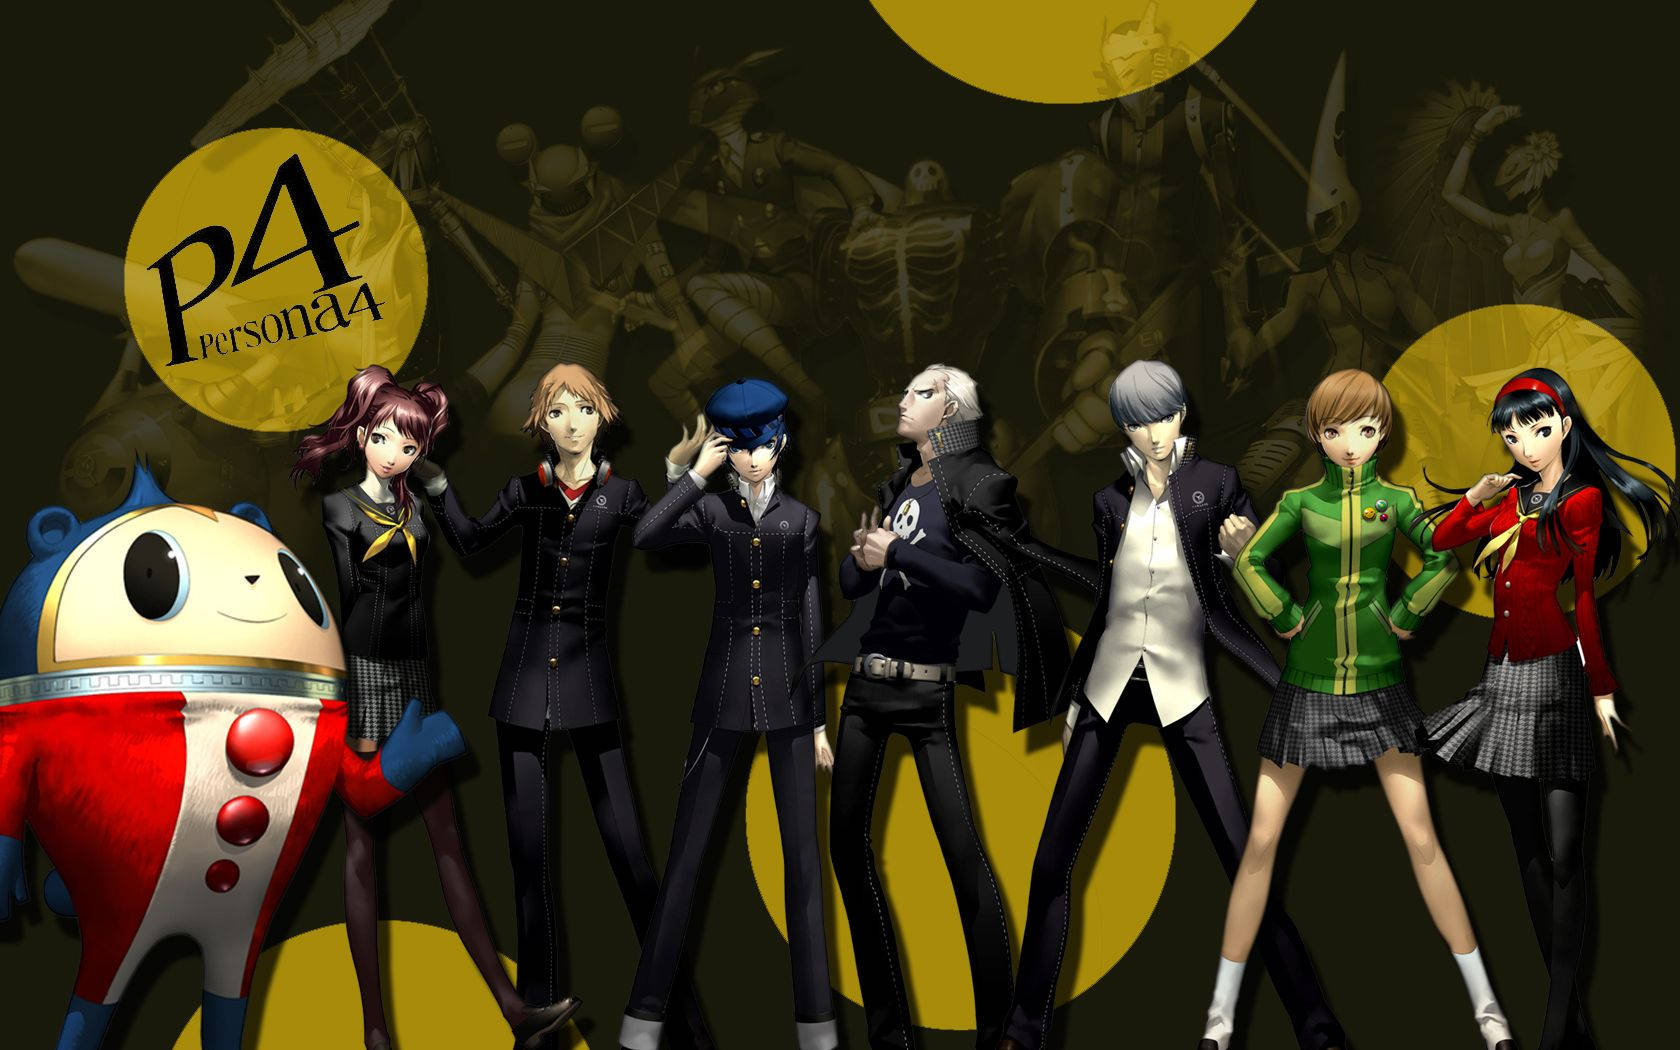 Teddie Presents Persona 4 Characters Background